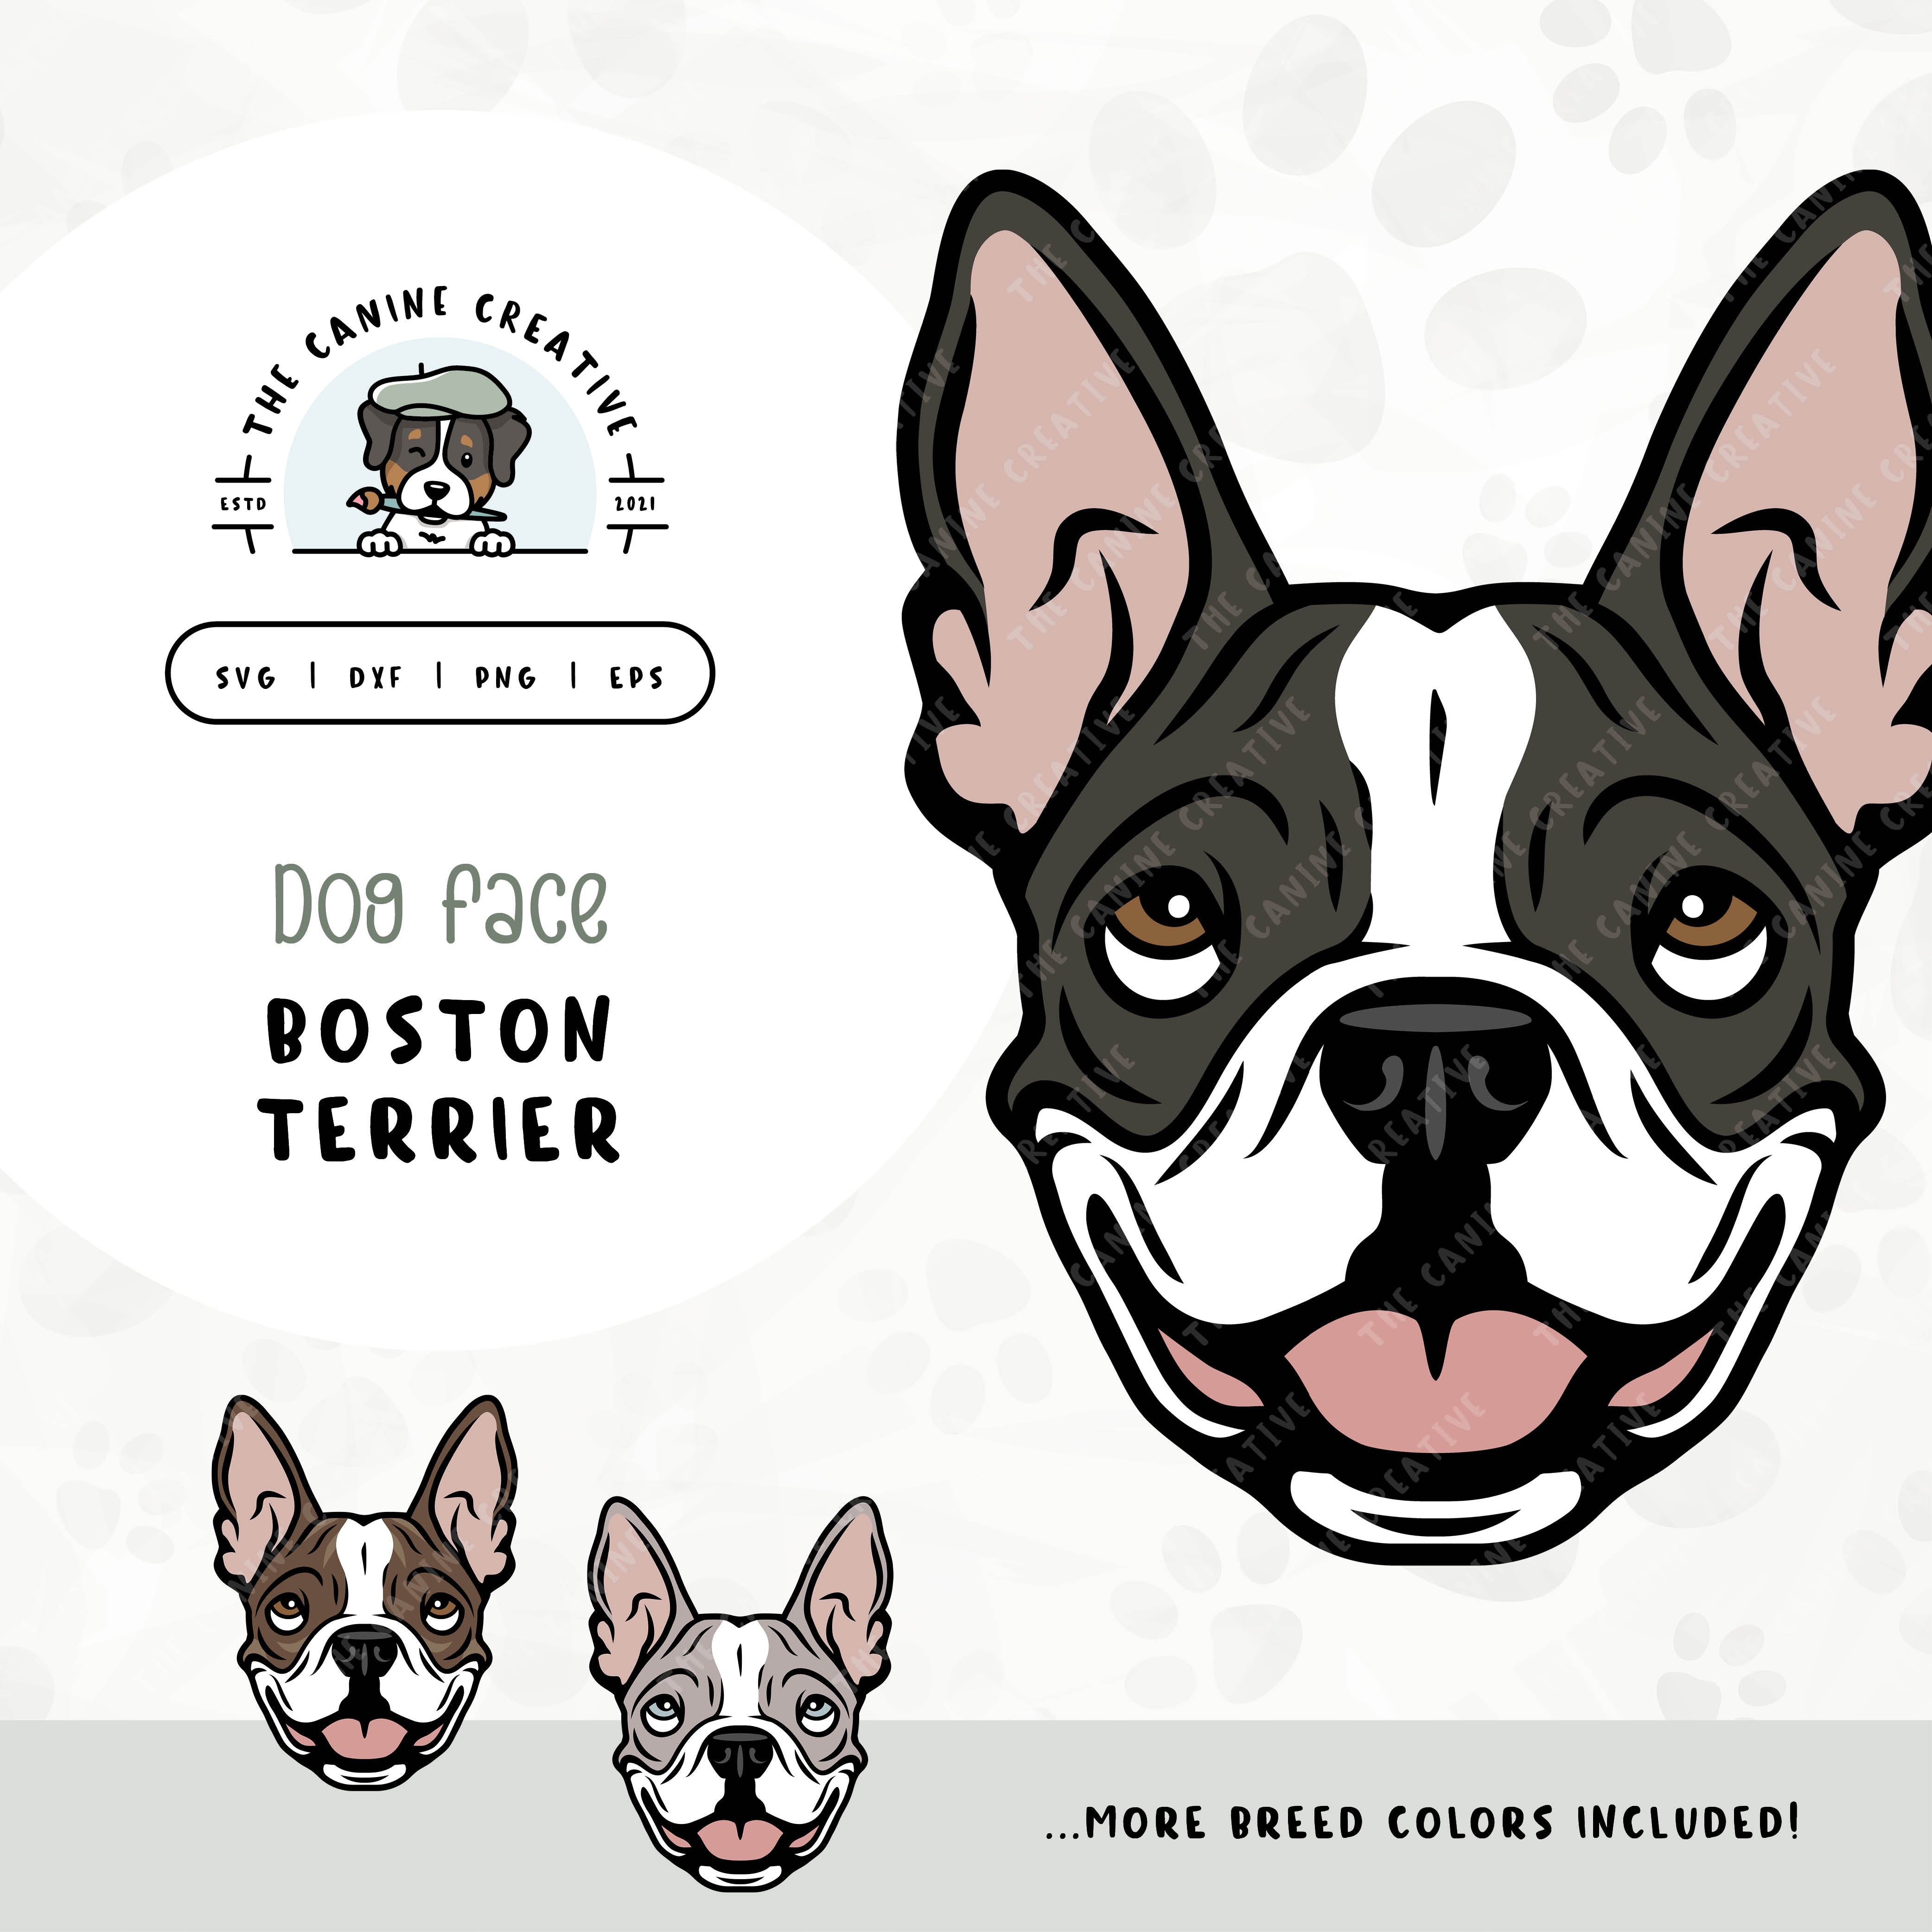 This illustrated design features a Boston Terrier face. File formats include: SVG, DXF, PNG, and EPS.